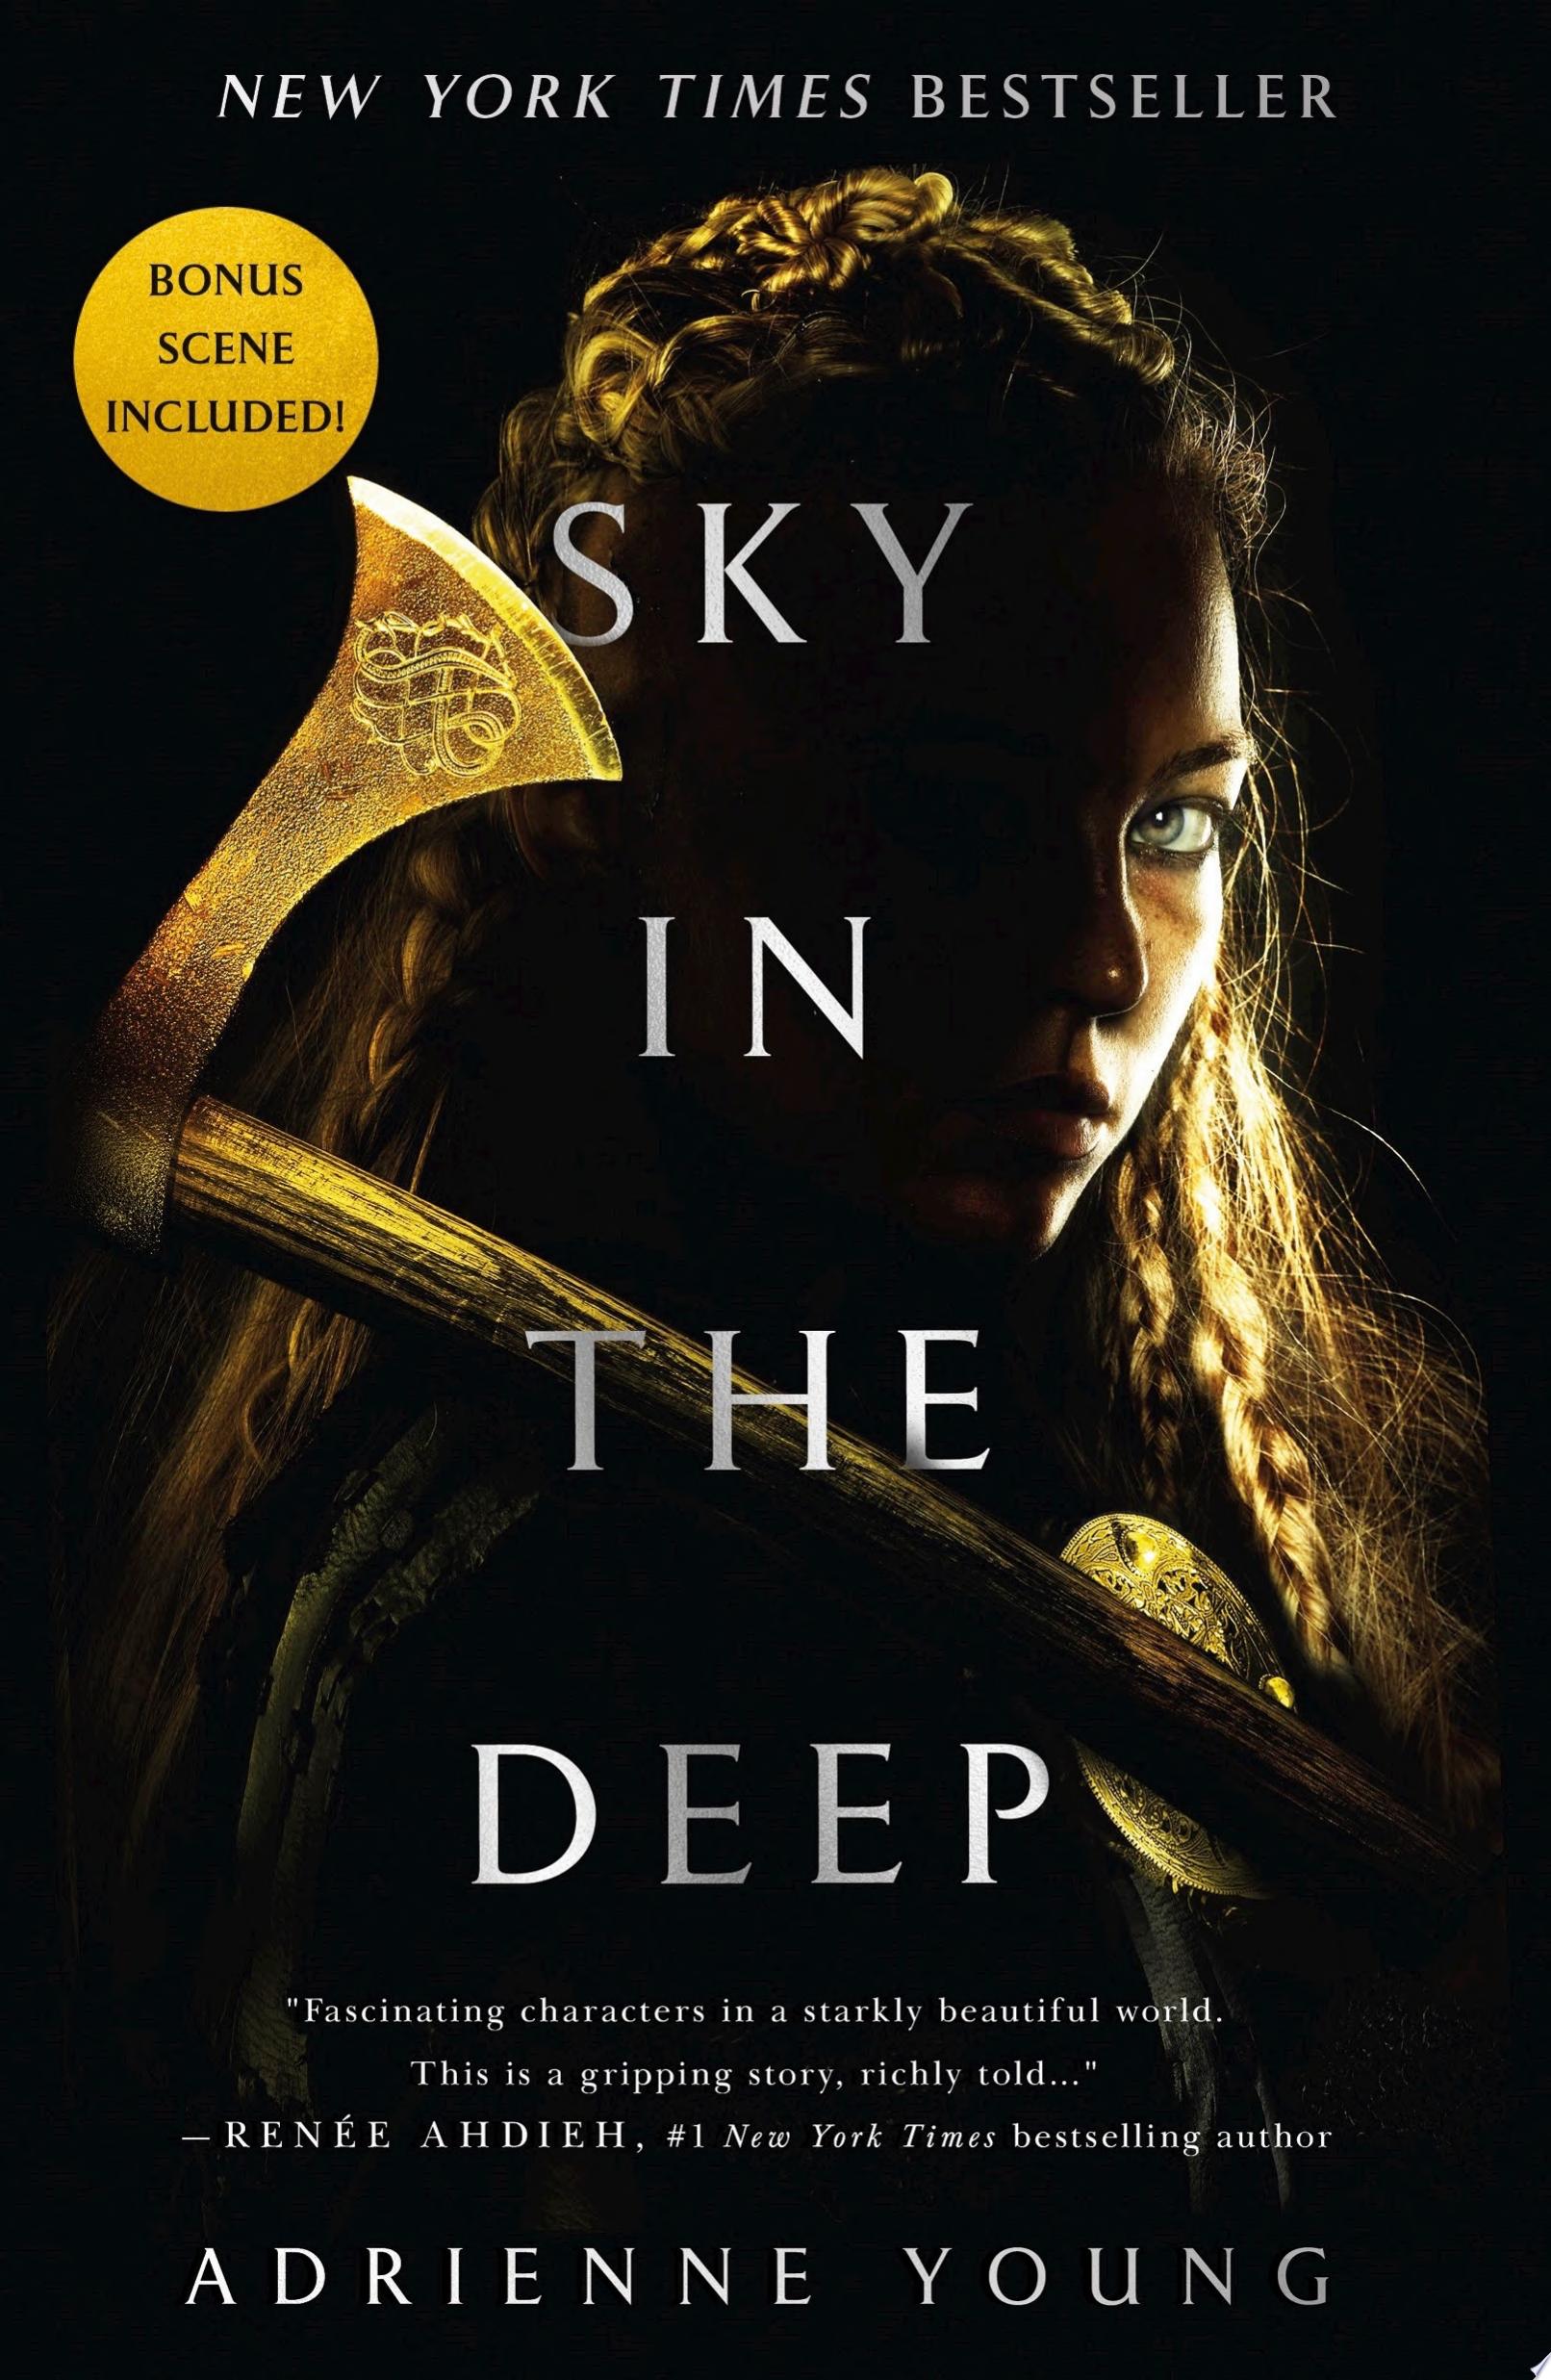 Image for "Sky in the Deep"